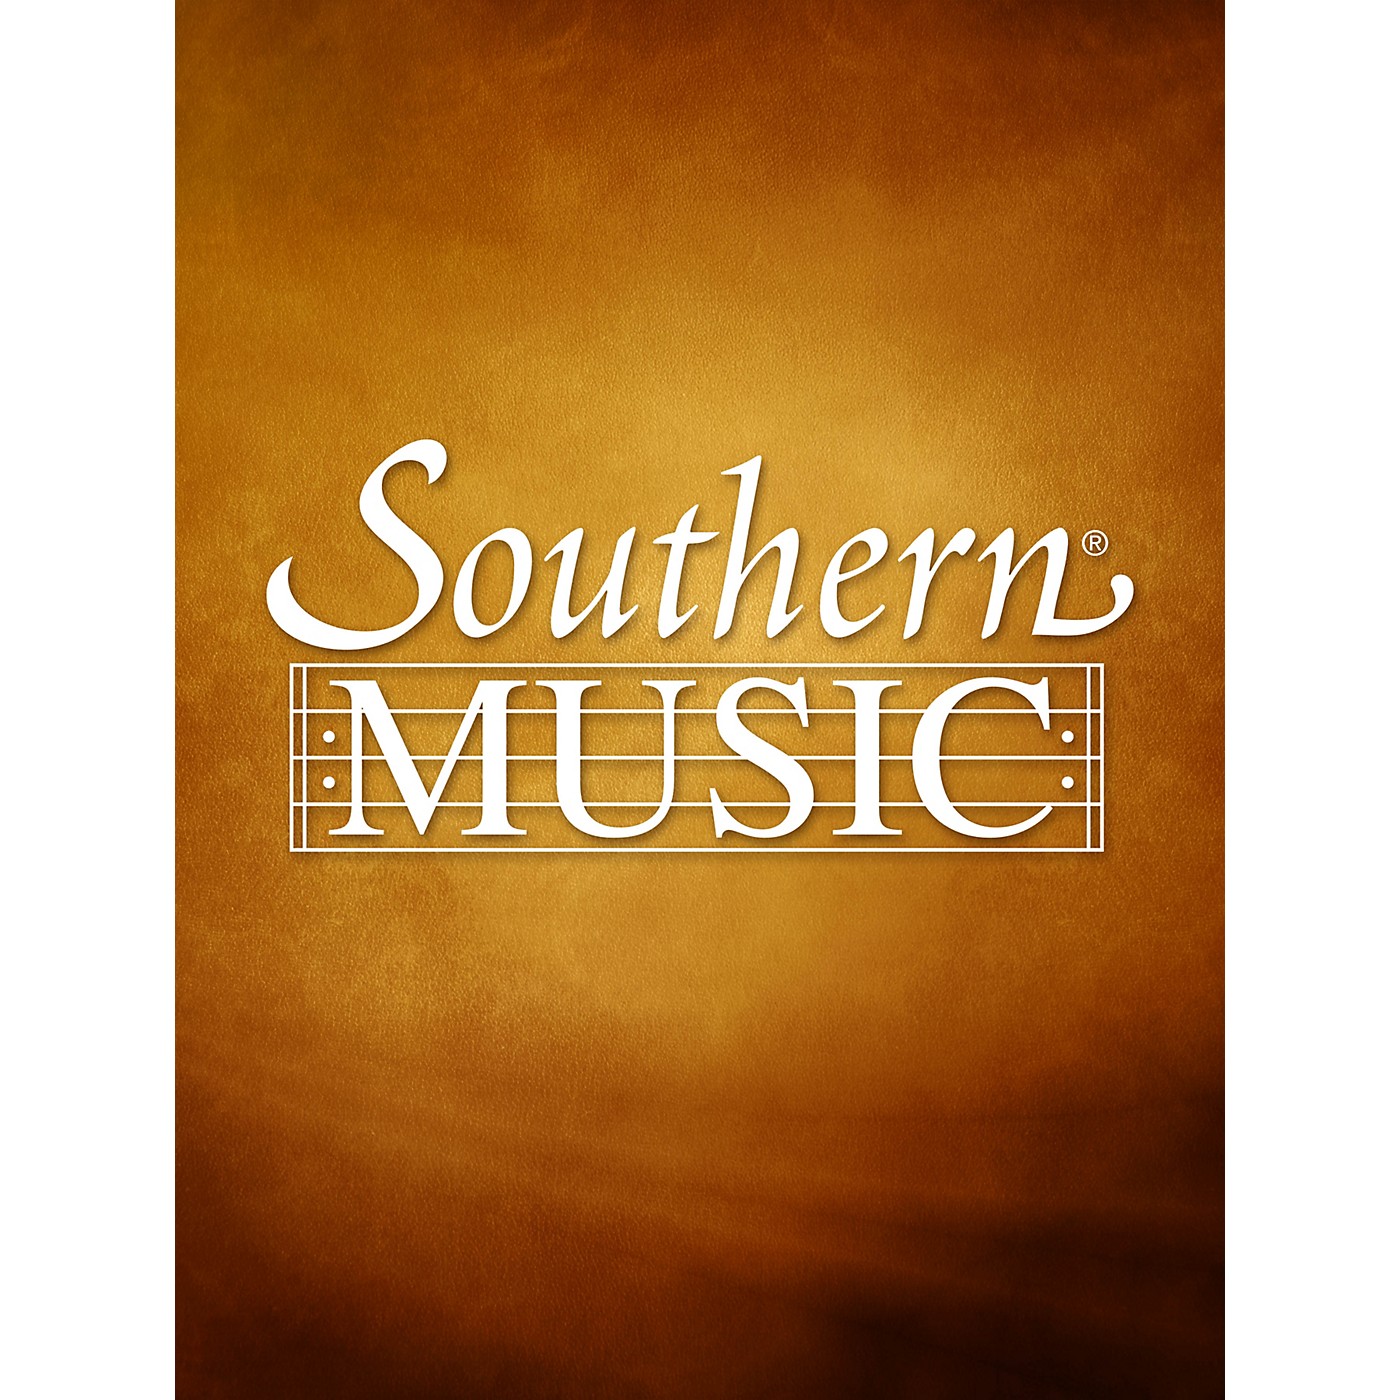 Hal Leonard Tandem (Percussion Music/Snare Drum Ensemble) Southern Music Series Composed by Bellson, Louie thumbnail